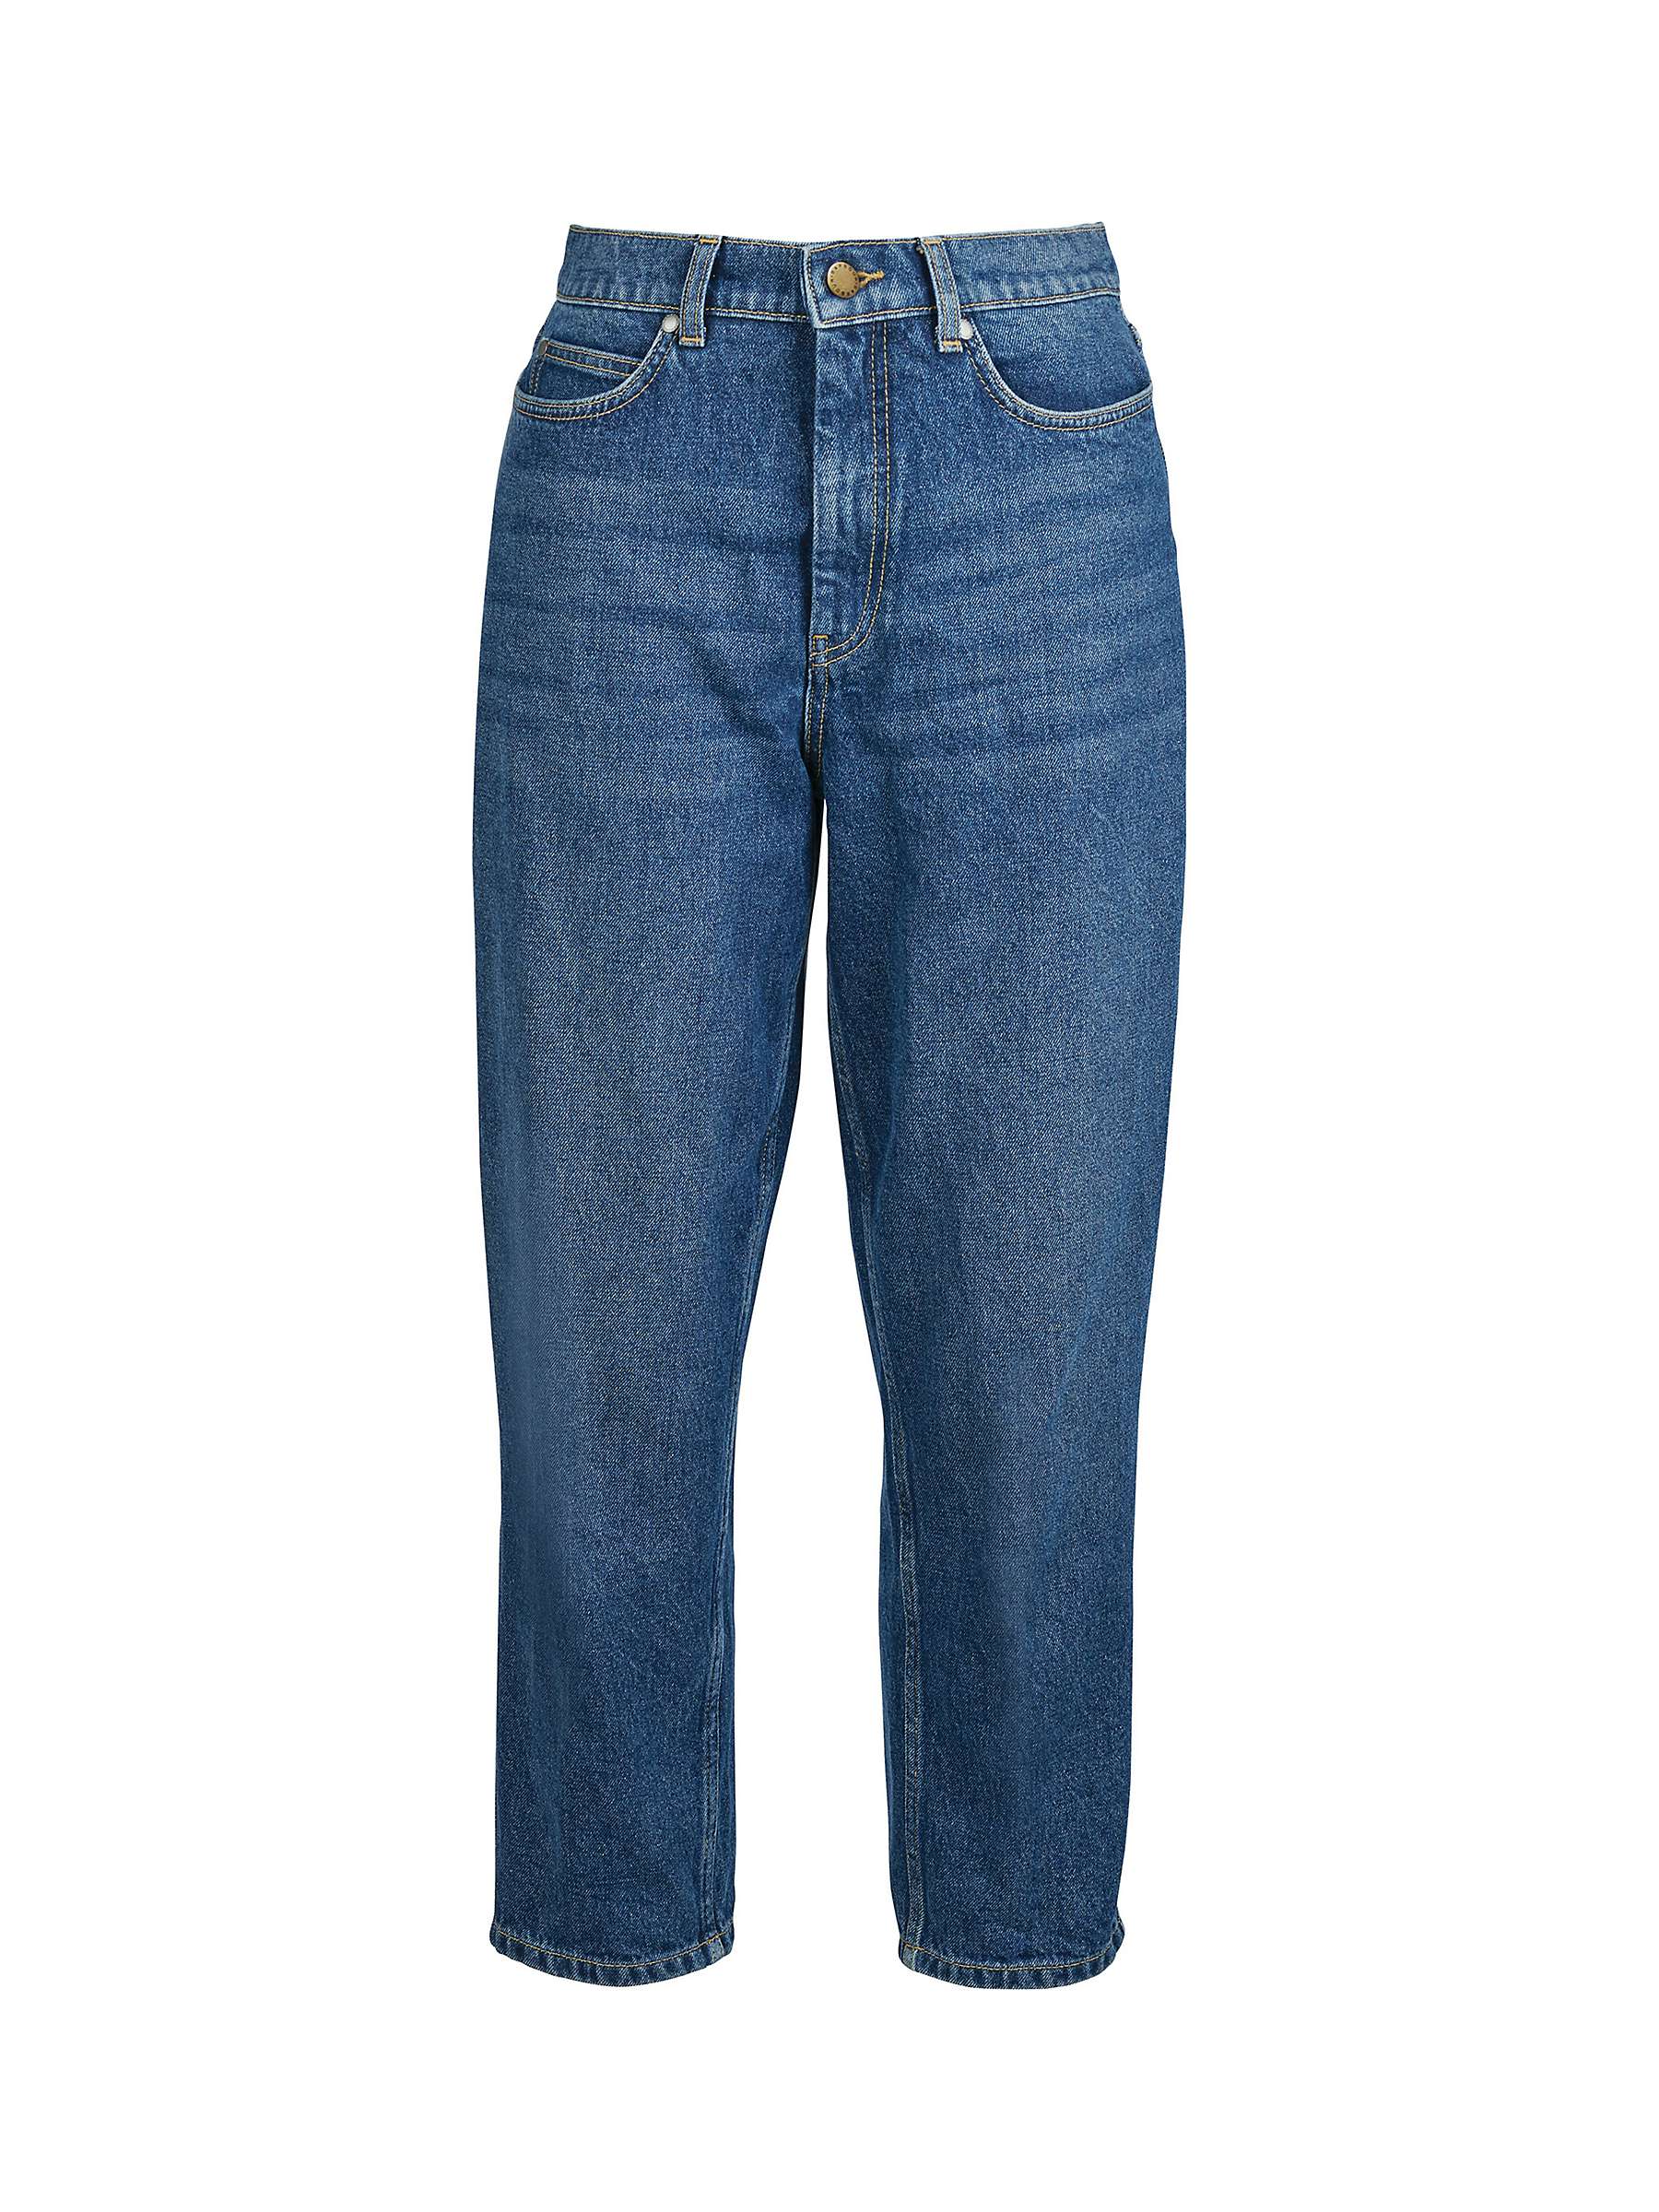 Buy Barbour Moorland High Rise Cropped Jeans, Original Wash Online at johnlewis.com